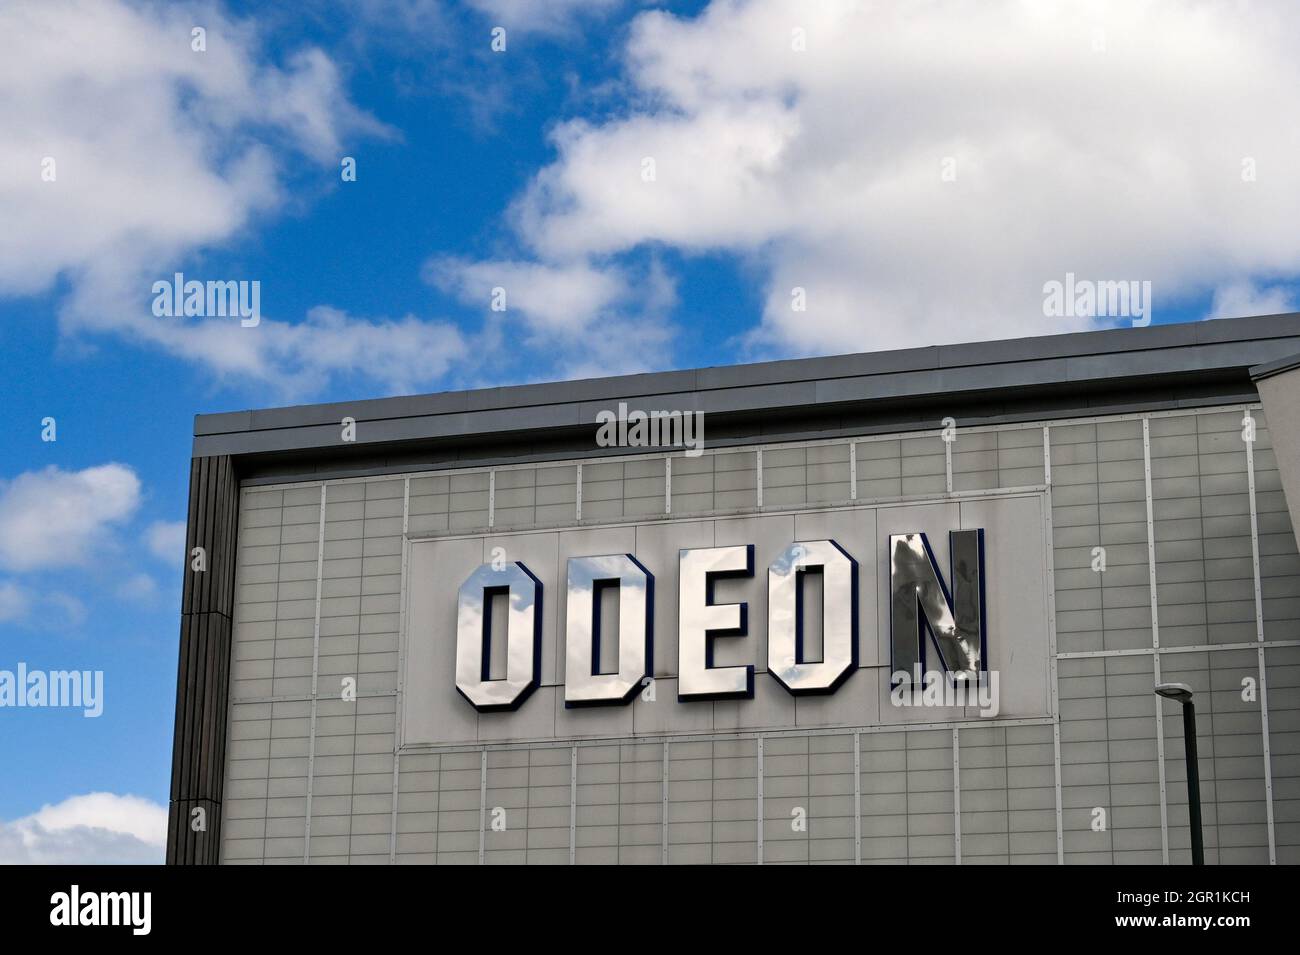 Bournemouth, England - June 2021: Sign on the outside of the Odeon cinema in Bournemouth town centre. No people. Stock Photo